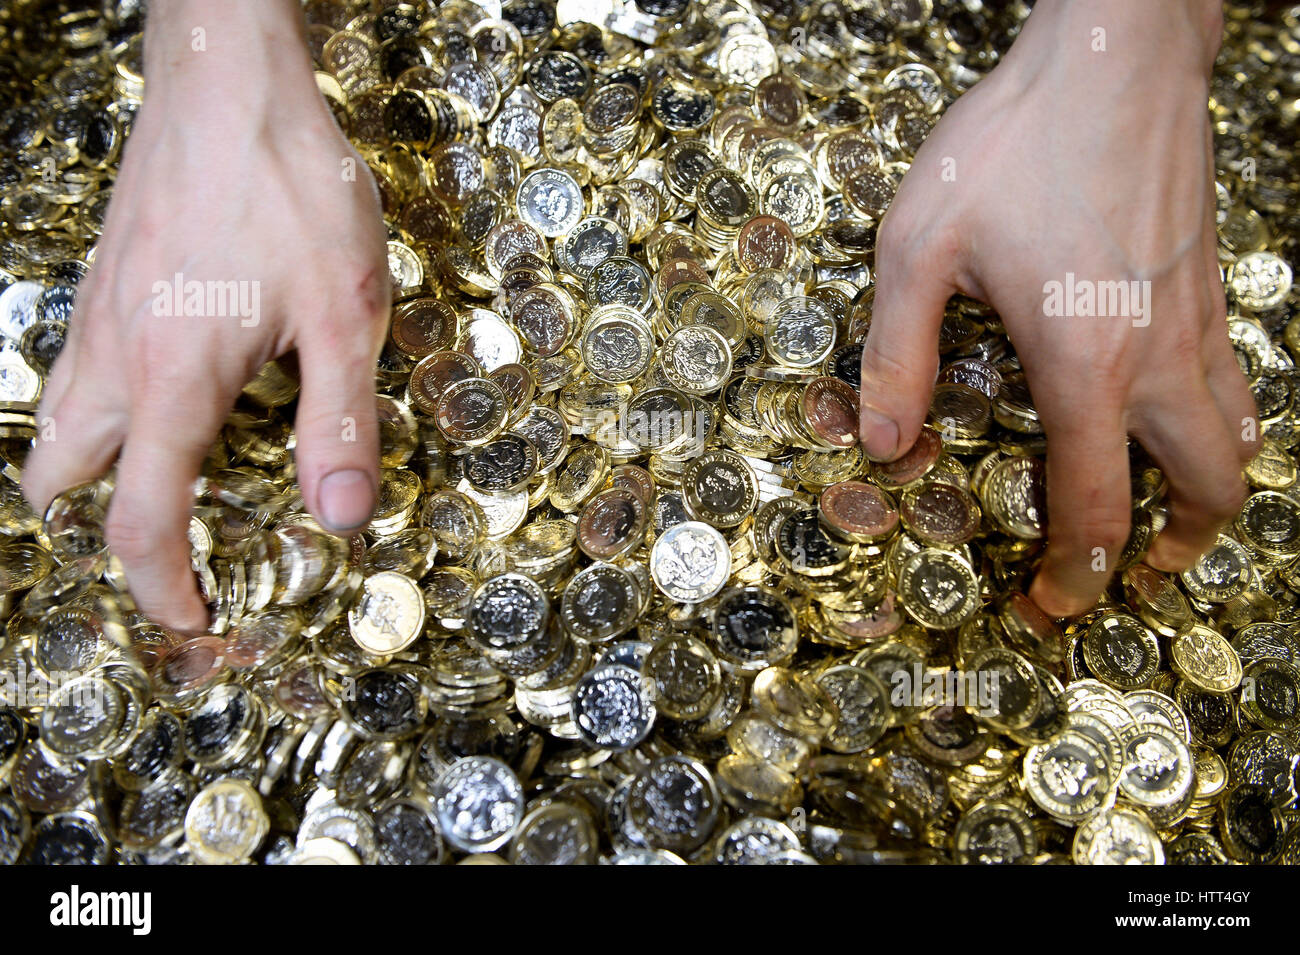 Editorial Use only &ETH; NO COMMERCIAL USE A worker grabs a handful of new 12-sided one pound coins from a metal crate as they are minted at the Royal Mint in Llantrisant, Wales. Stock Photo